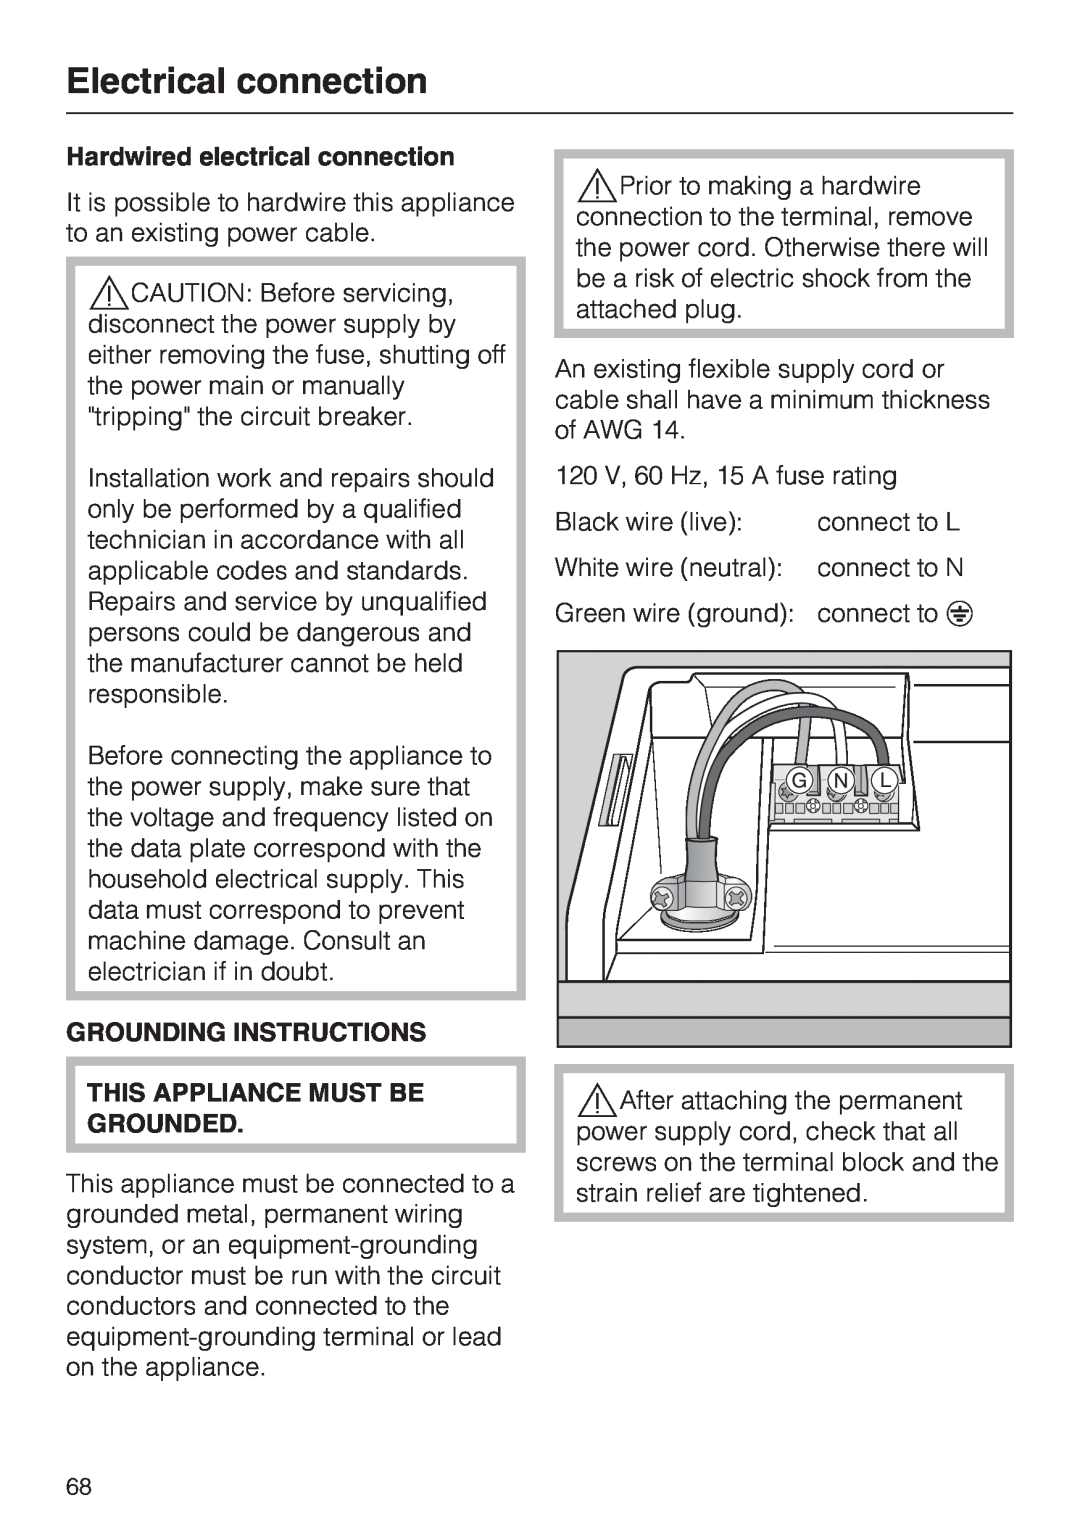 Miele G 5570, G 5575 operating instructions Electrical connection, Hardwired electrical connection, Grounding Instructions 